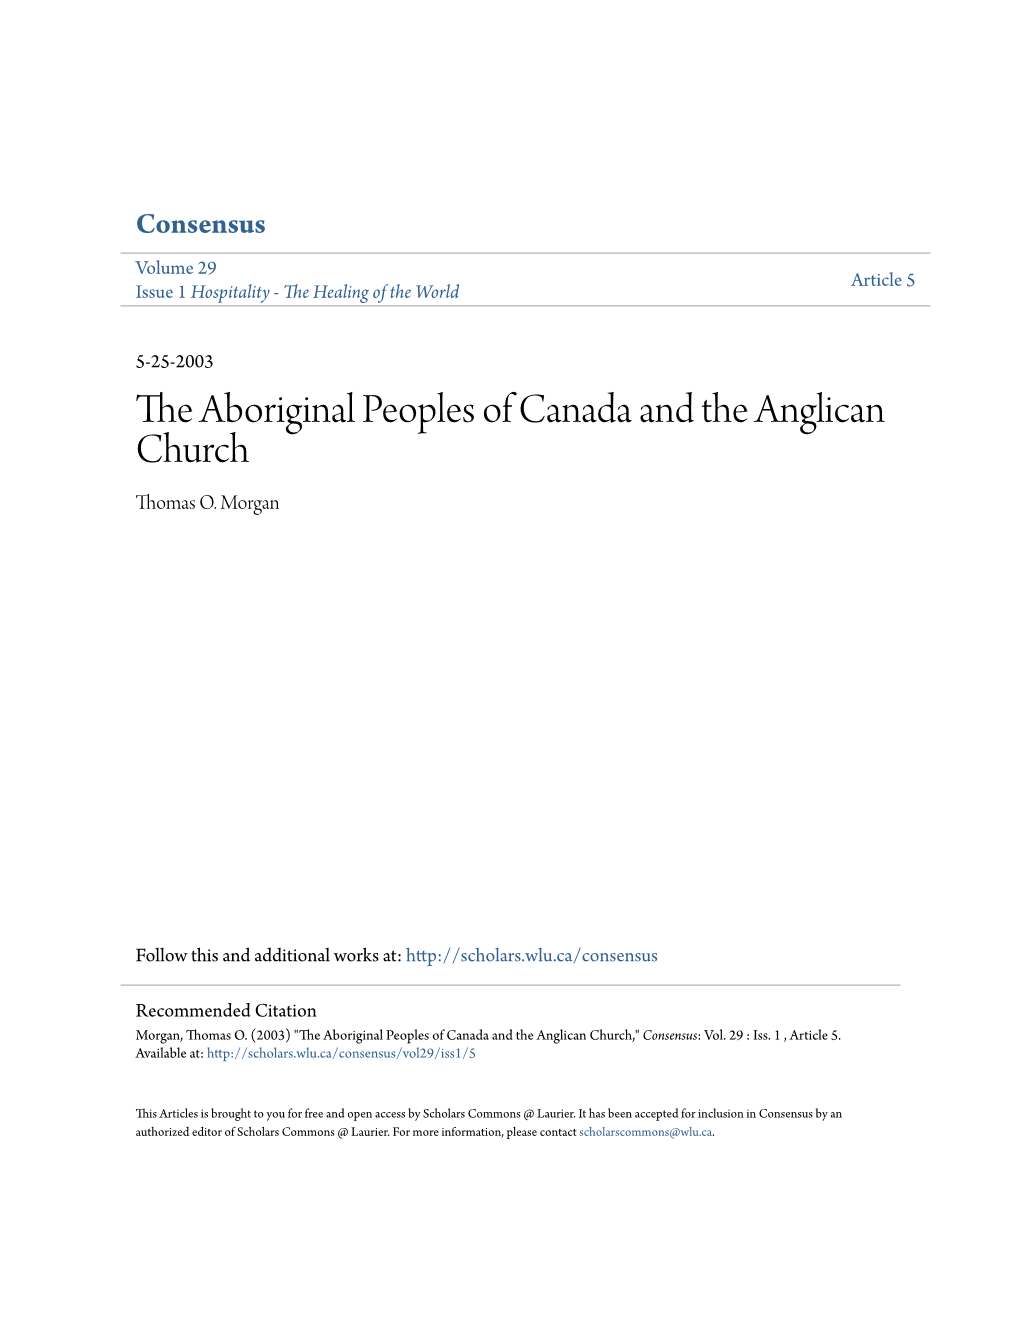 The Aboriginal Peoples of Canada and the Anglican Church Thomas O